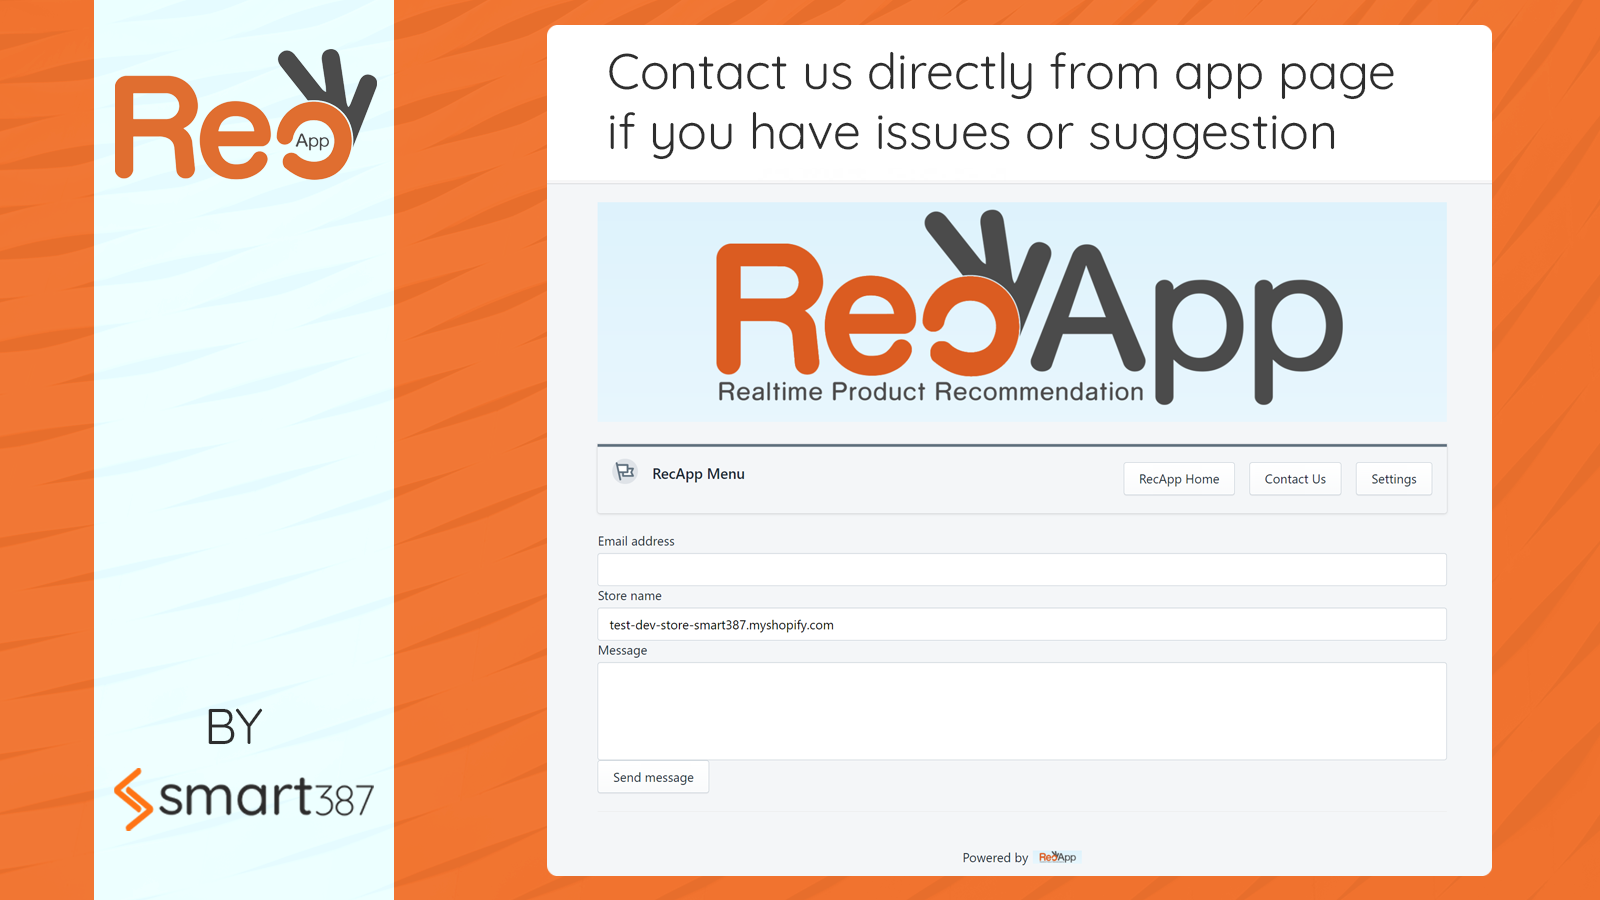 Contact us with feature request or issues directly from app